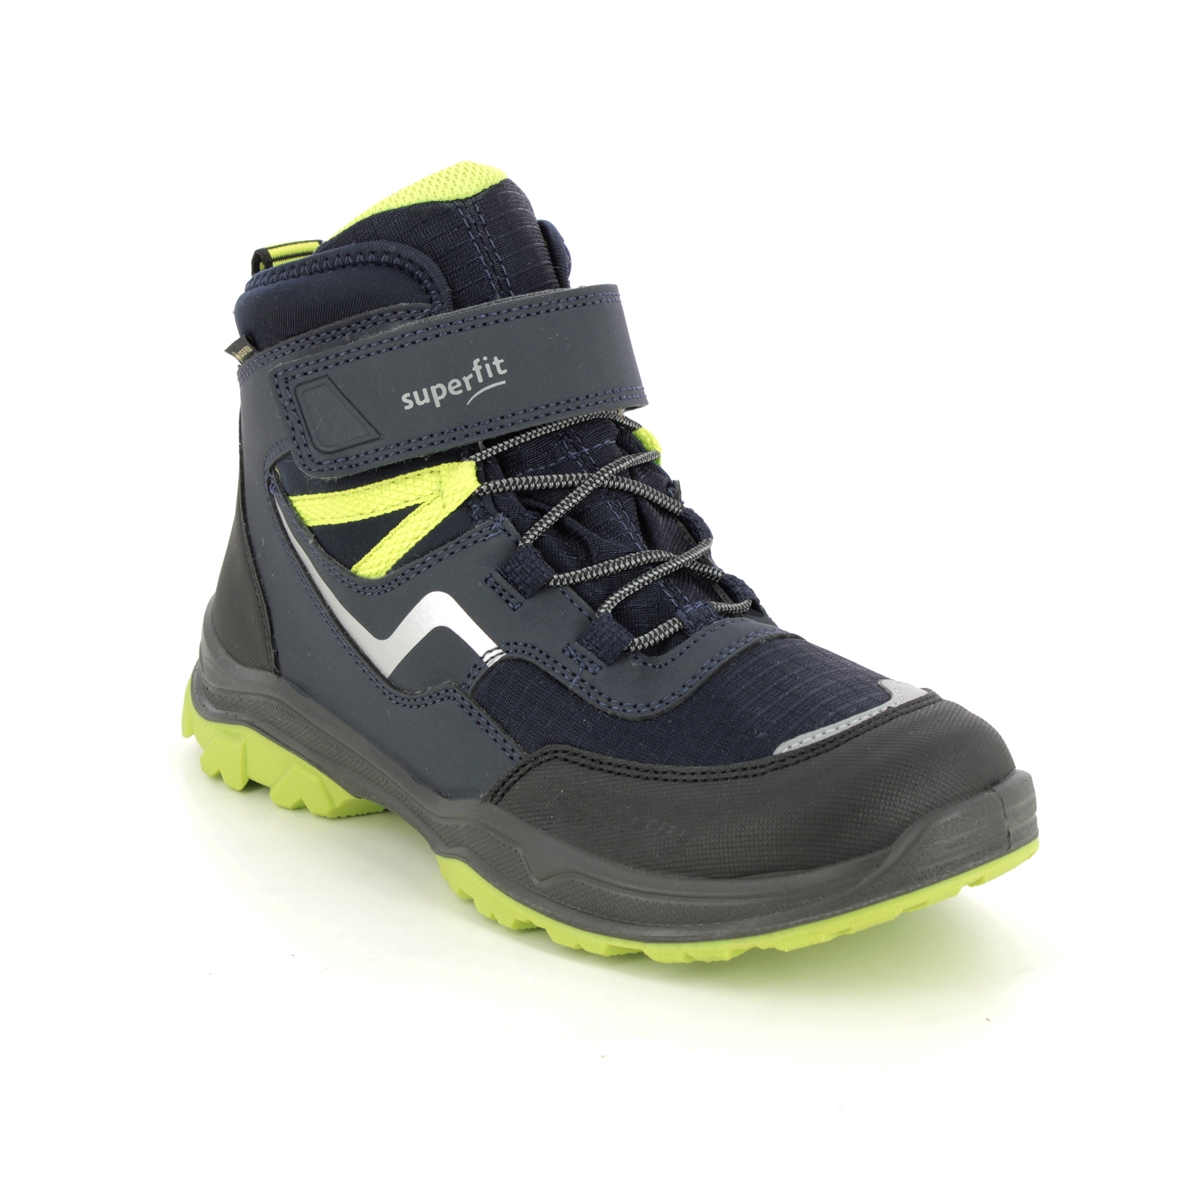 Superfit Jupiter Bungee Gtx Navy Lime Kids boys boots 1000074-8000 in a Plain Man-made in Size 37